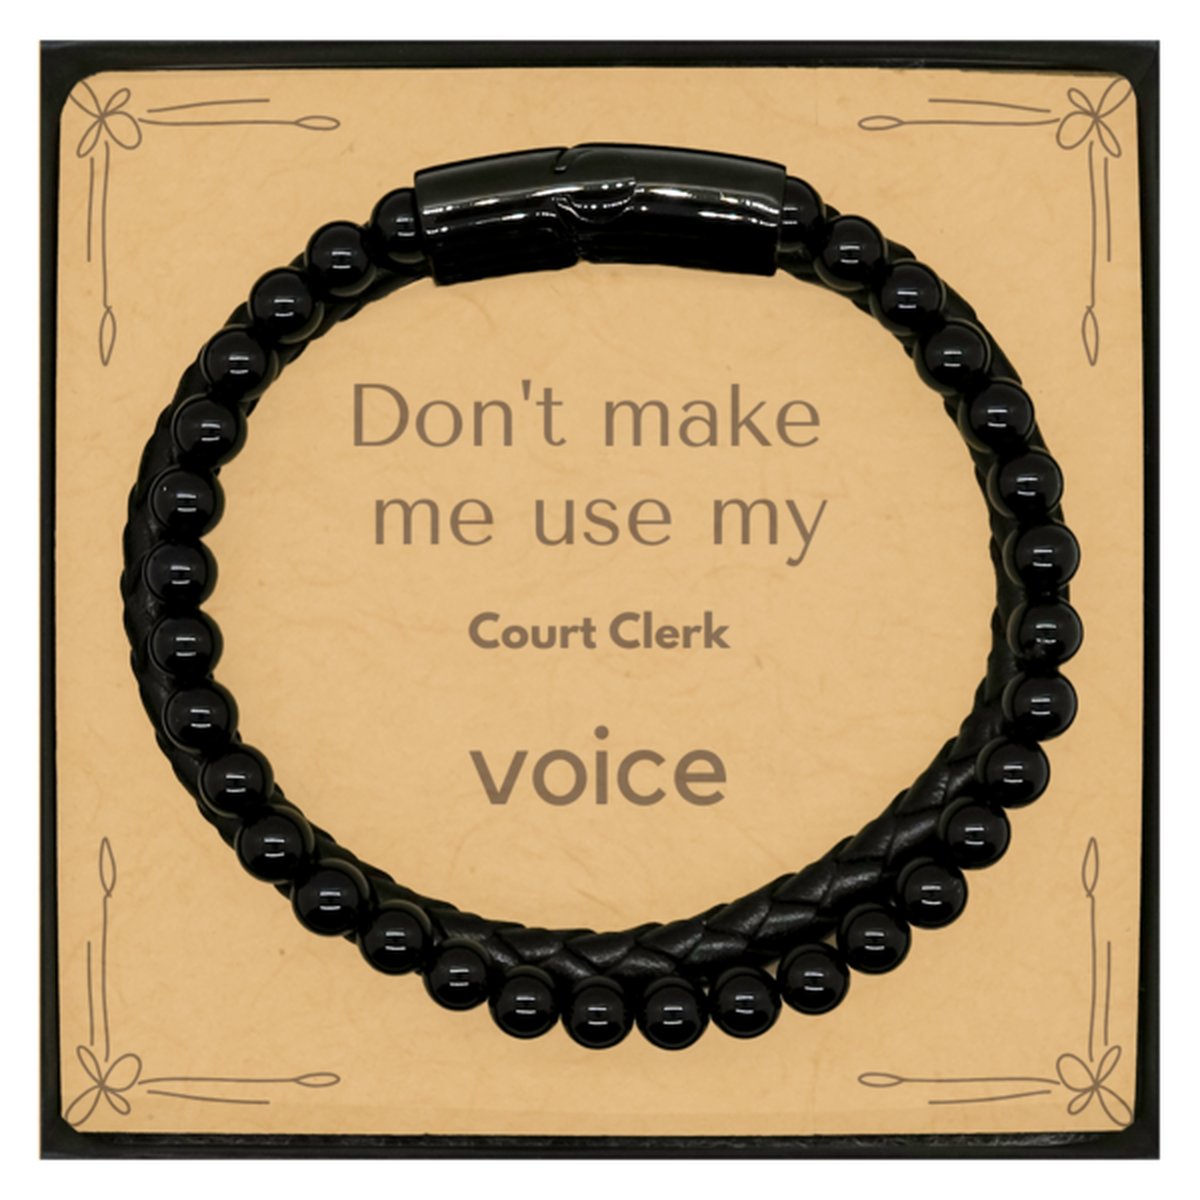 Don't make me use my Court Clerk voice, Sarcasm Court Clerk Card Gifts, Christmas Court Clerk Stone Leather Bracelets Birthday Unique Gifts For Court Clerk Coworkers, Men, Women, Colleague, Friends